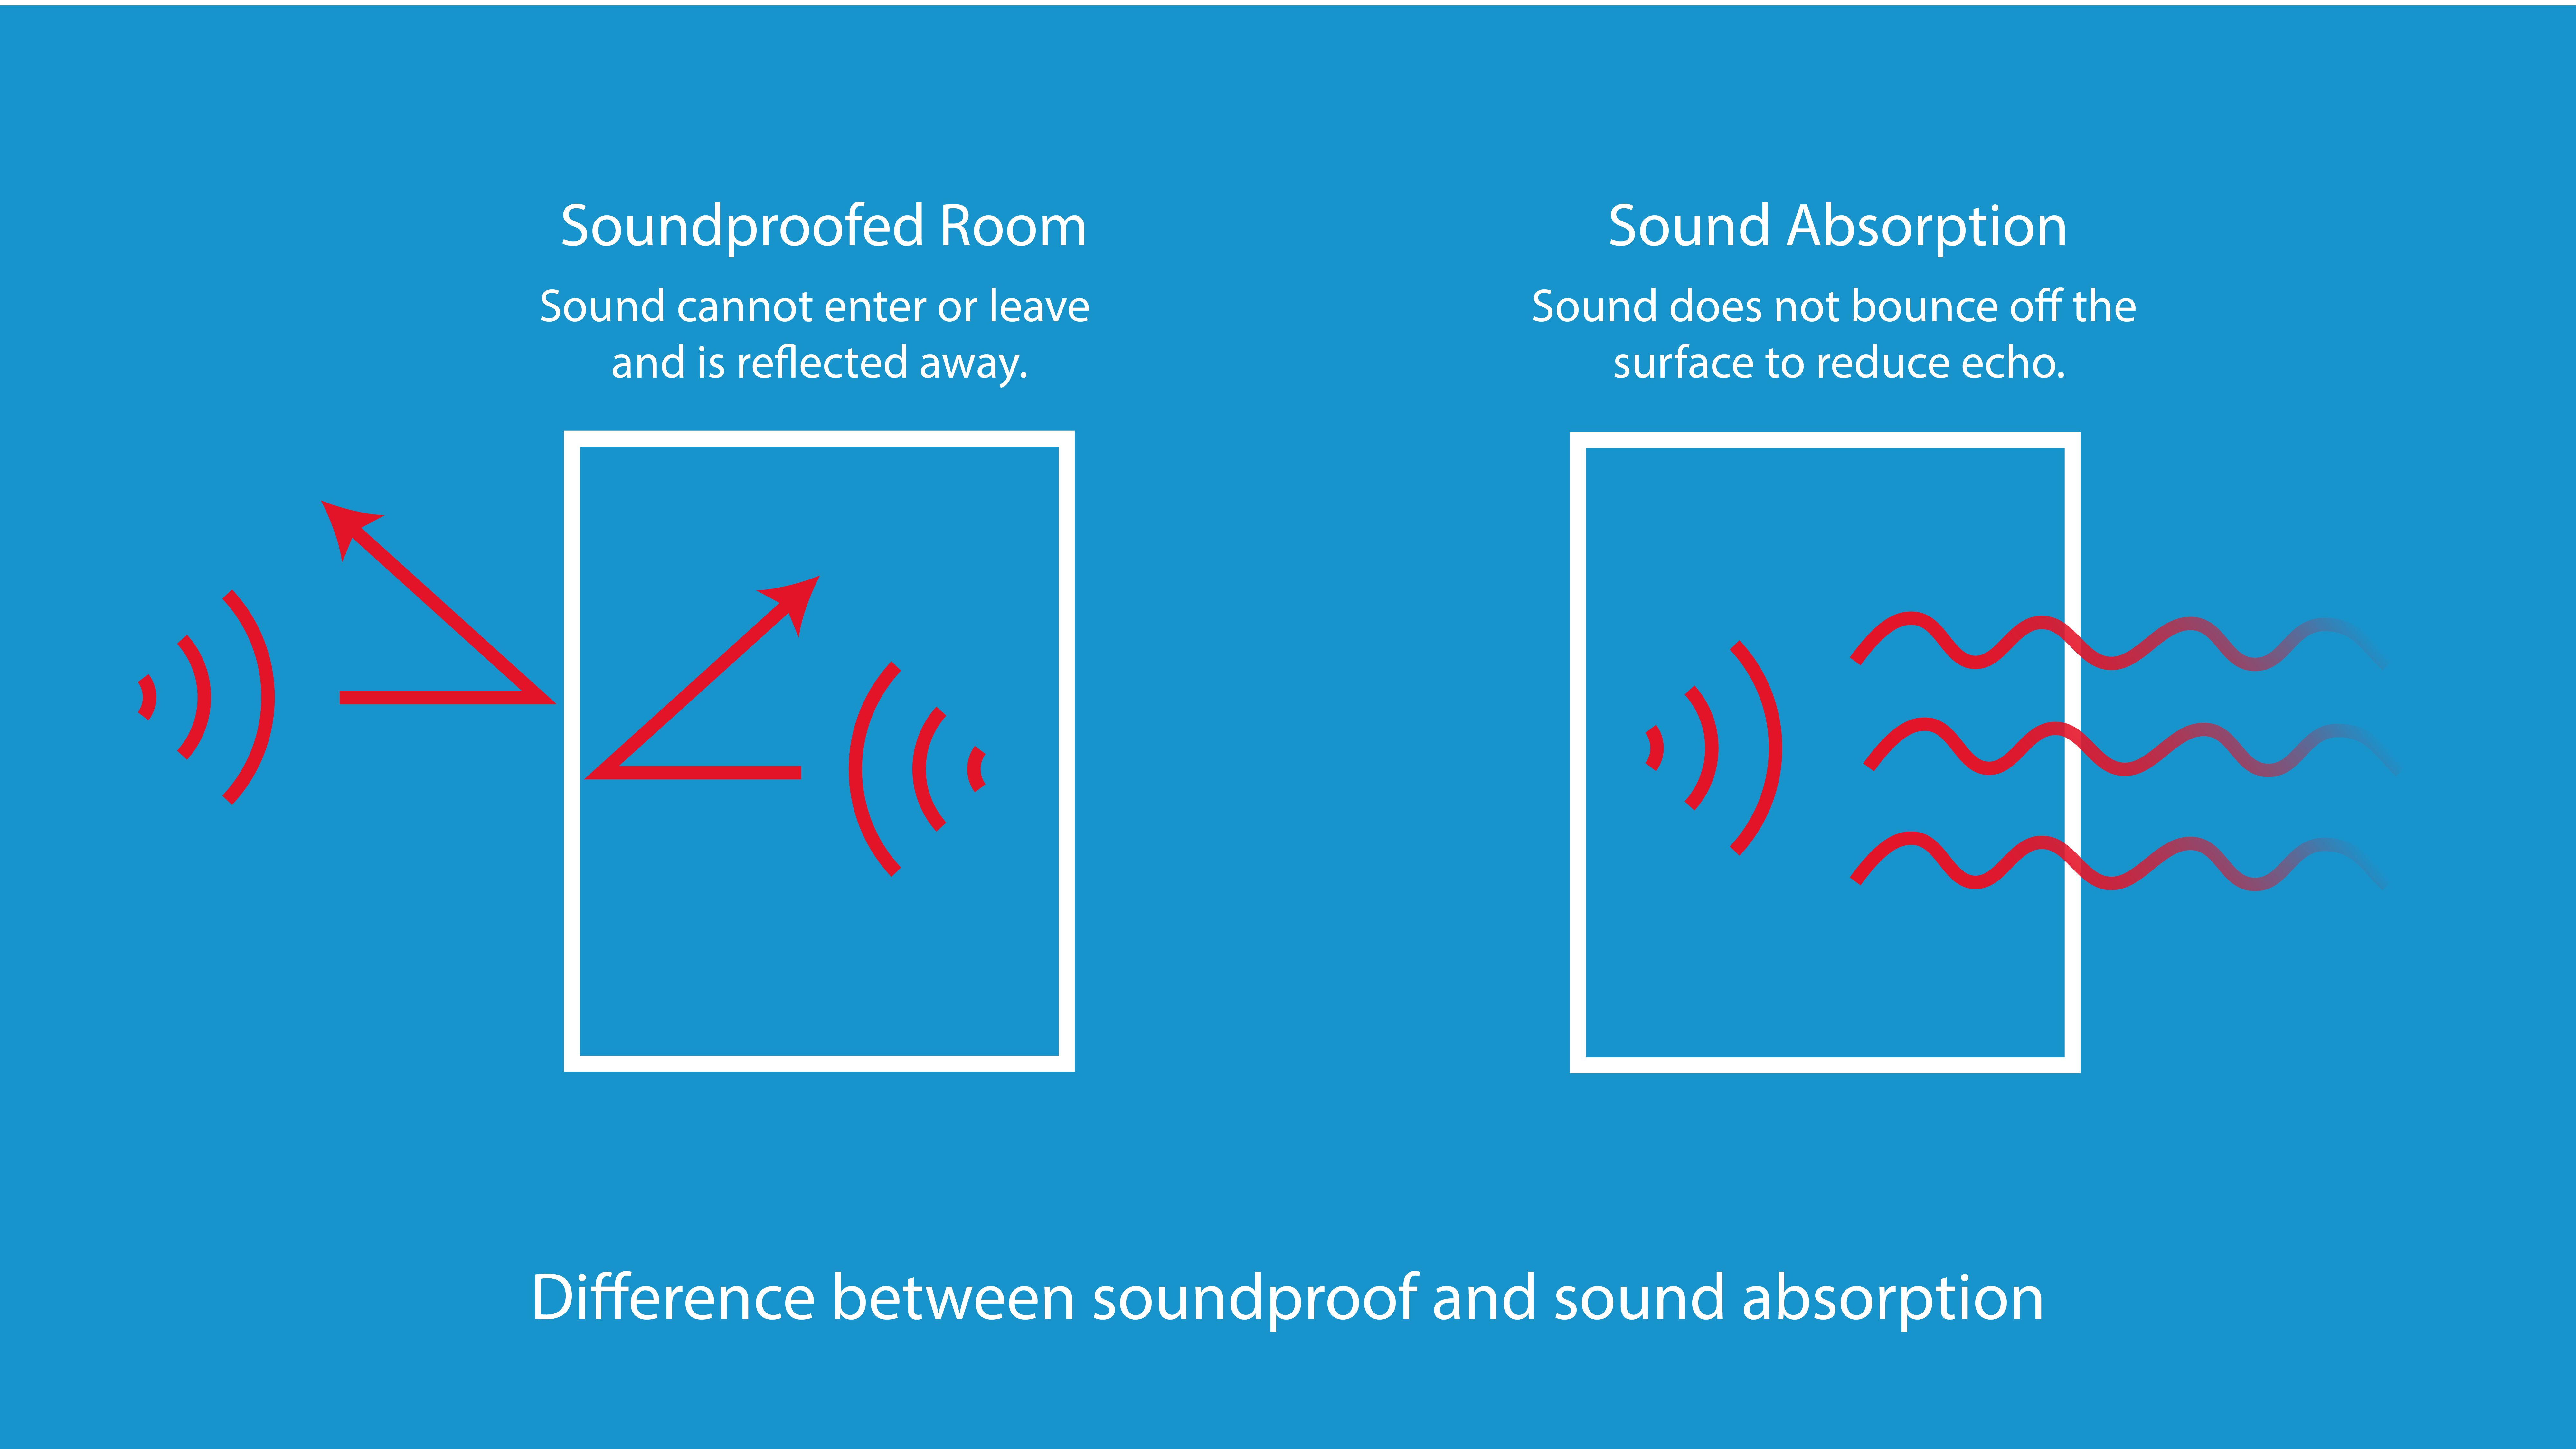 infographic showing the difference between soundproofing and sound absorption